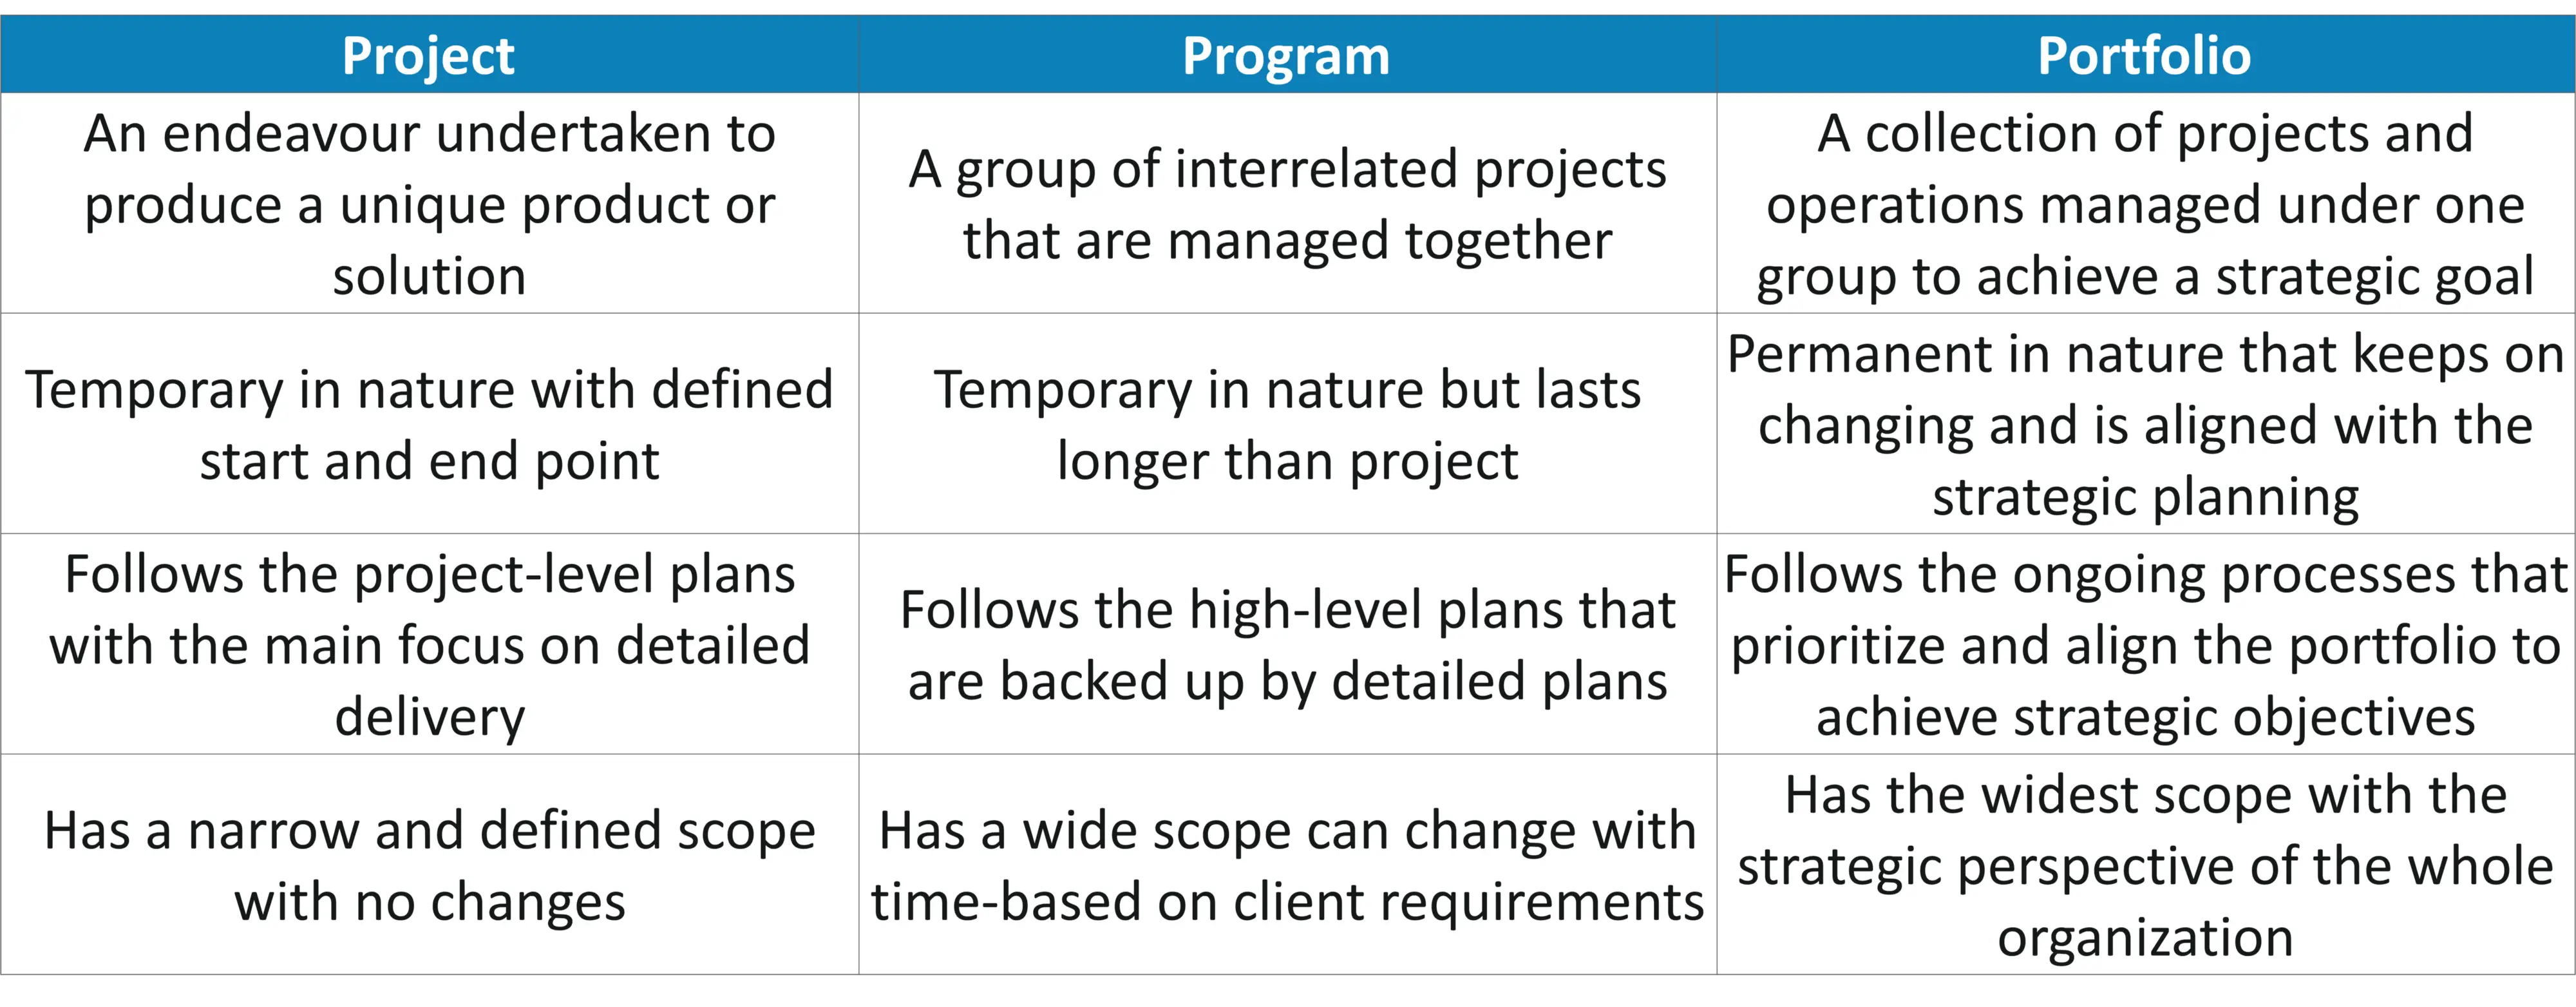 Top 30 Project Manager Interview Questions You Need to Know